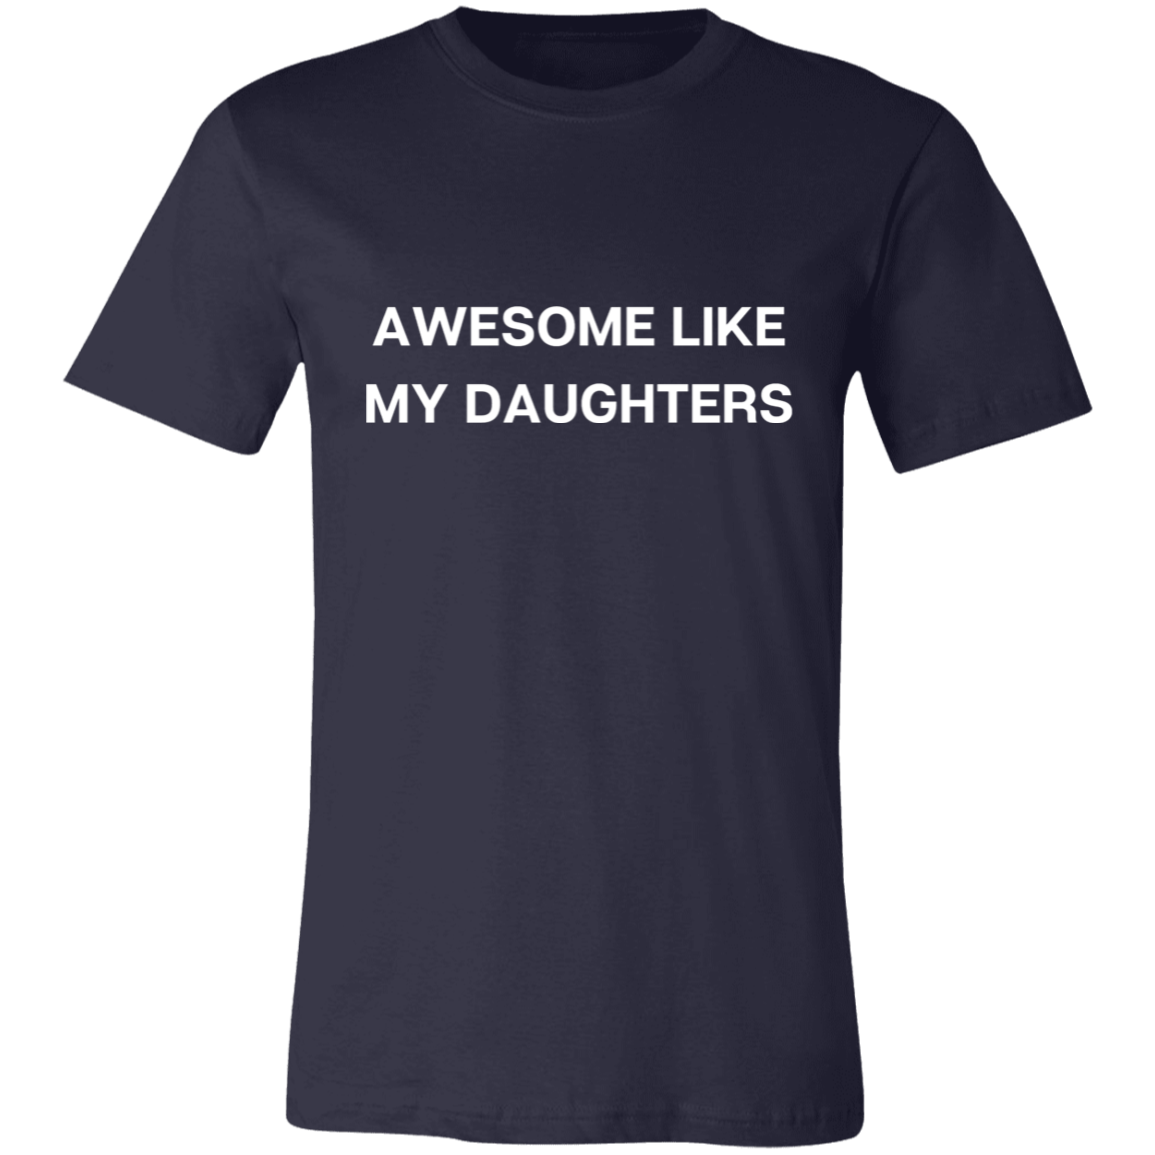 Awesome Like My Daughters (I) Short-Sleeve T-Shirt